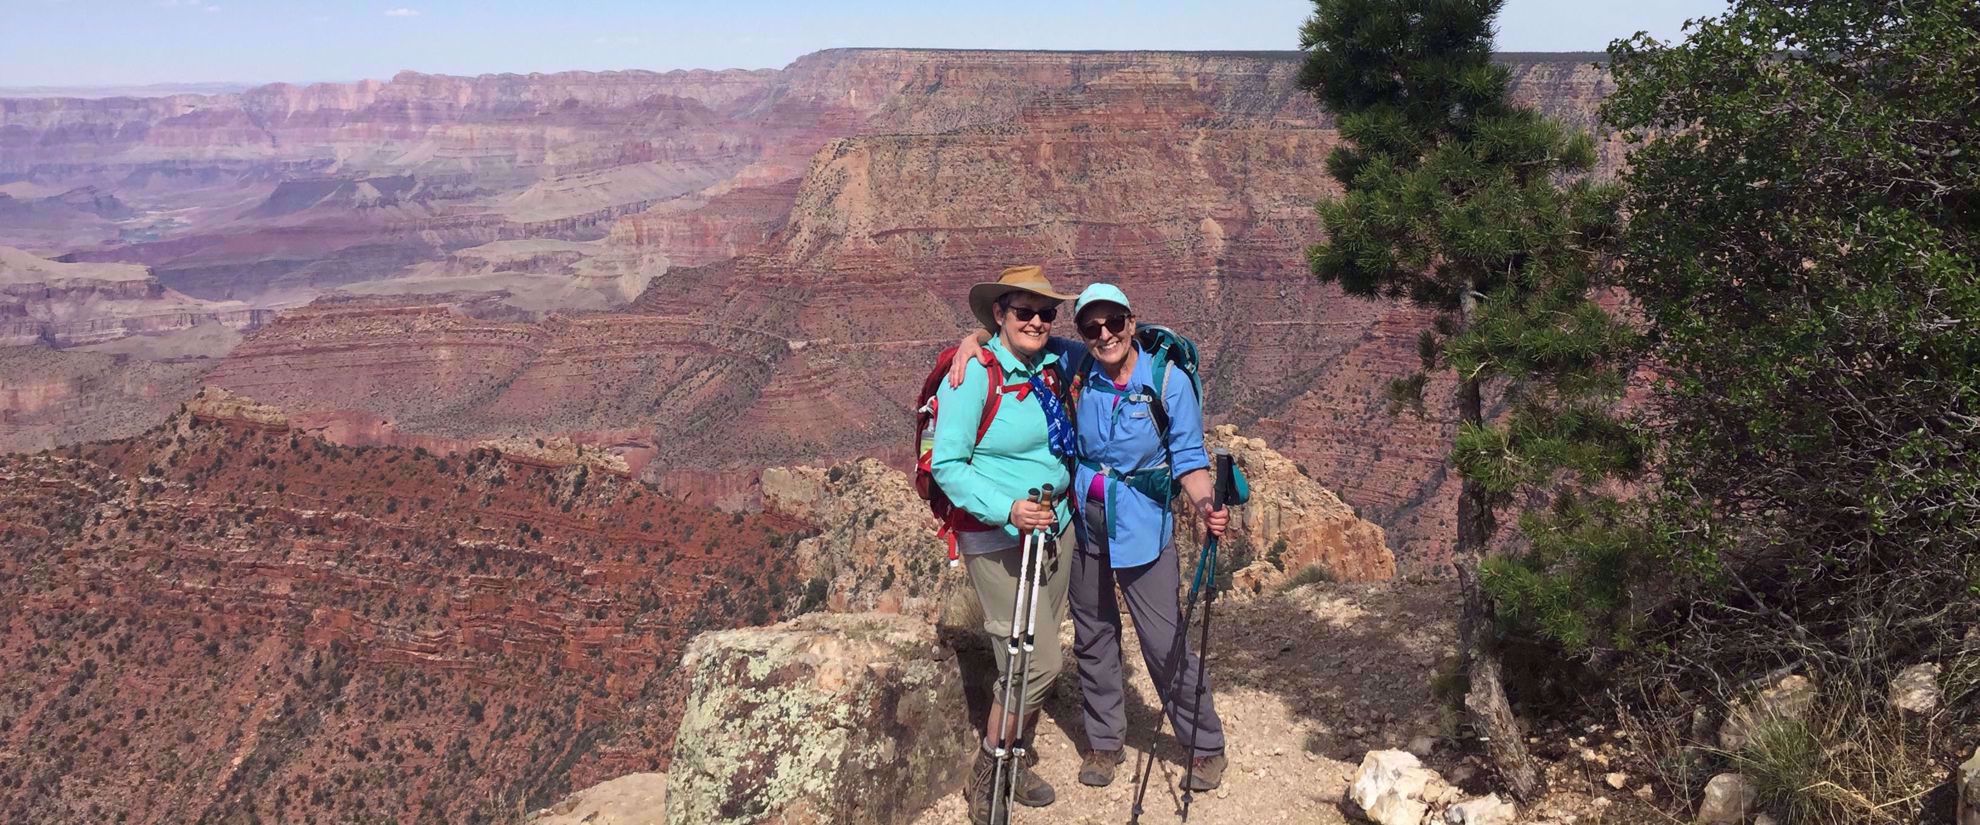 women pose for photo during hike through grand canyon